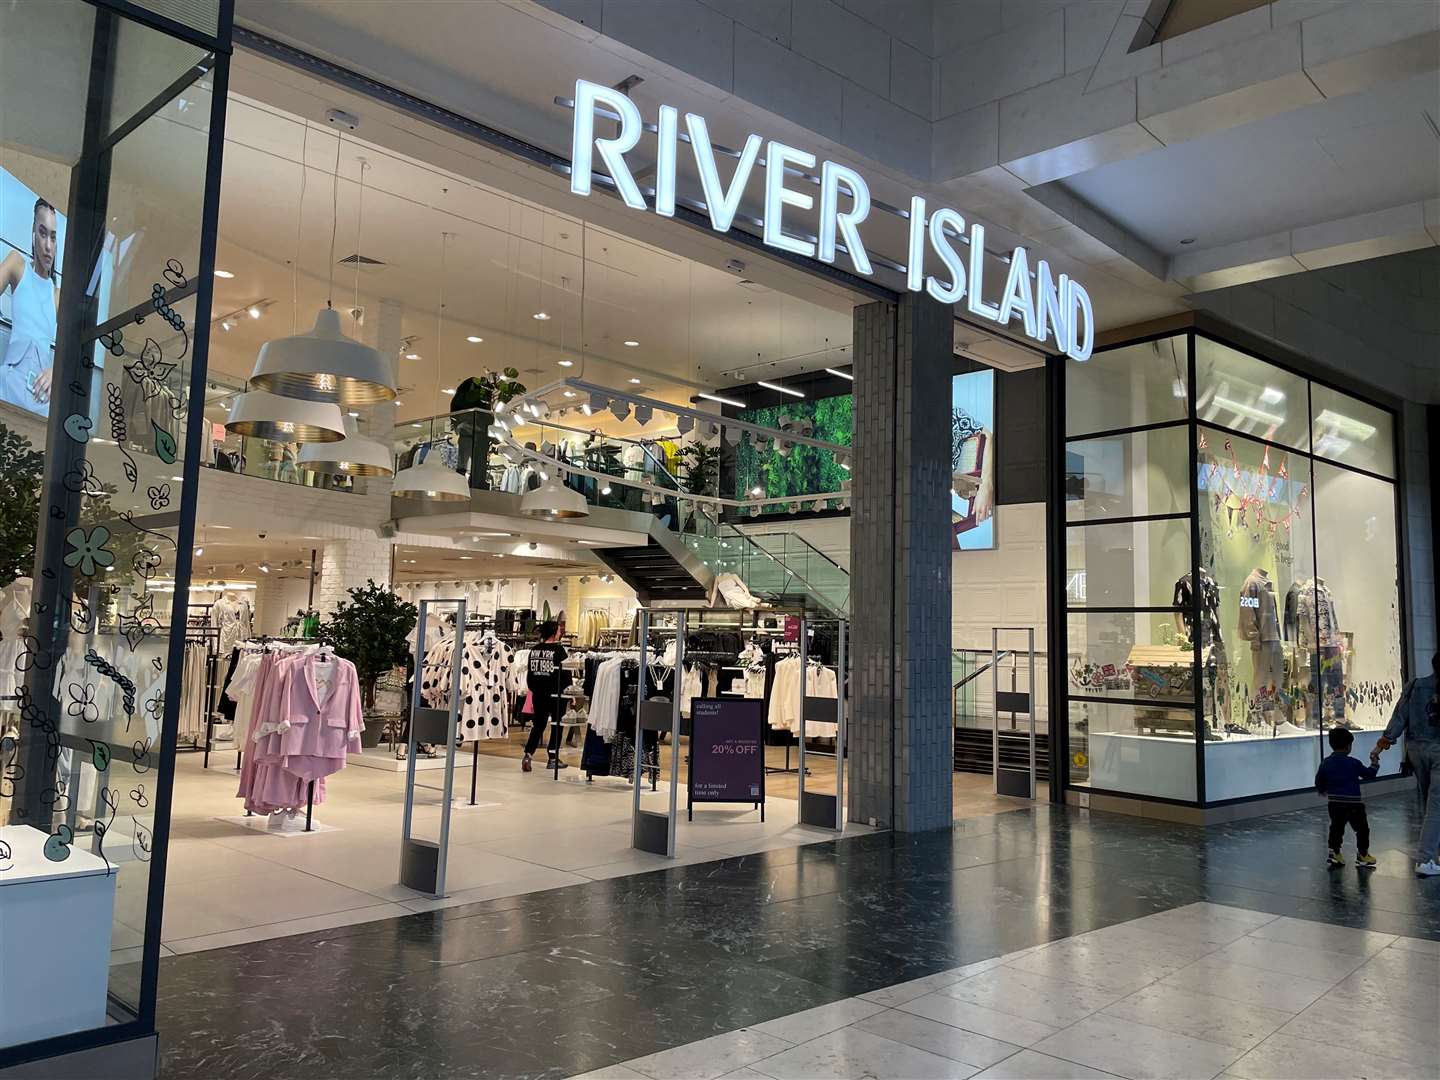 River Island is one of the shops that could be turned into a lesiure area